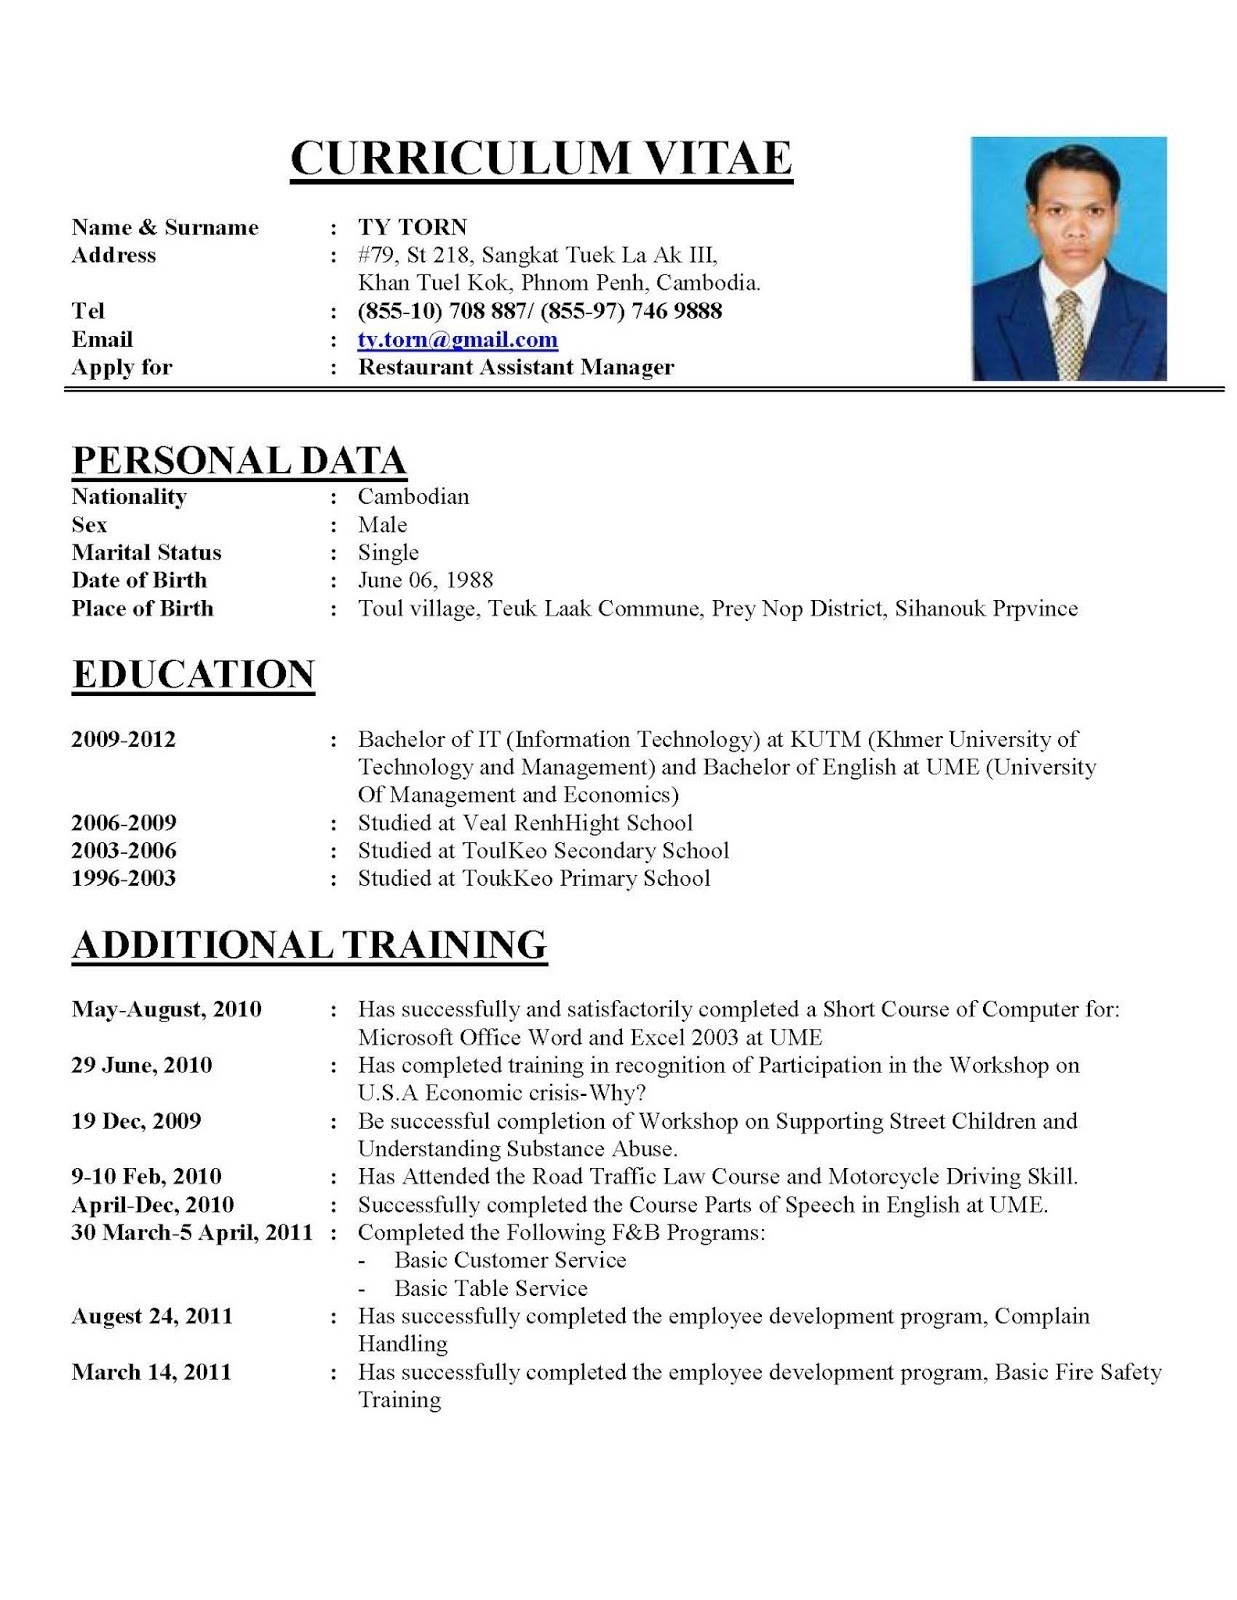 Creating A Resume Creating A Cv How To Create A Professional Resume For Free As How To Make A Good Resume creating a resume|wikiresume.com